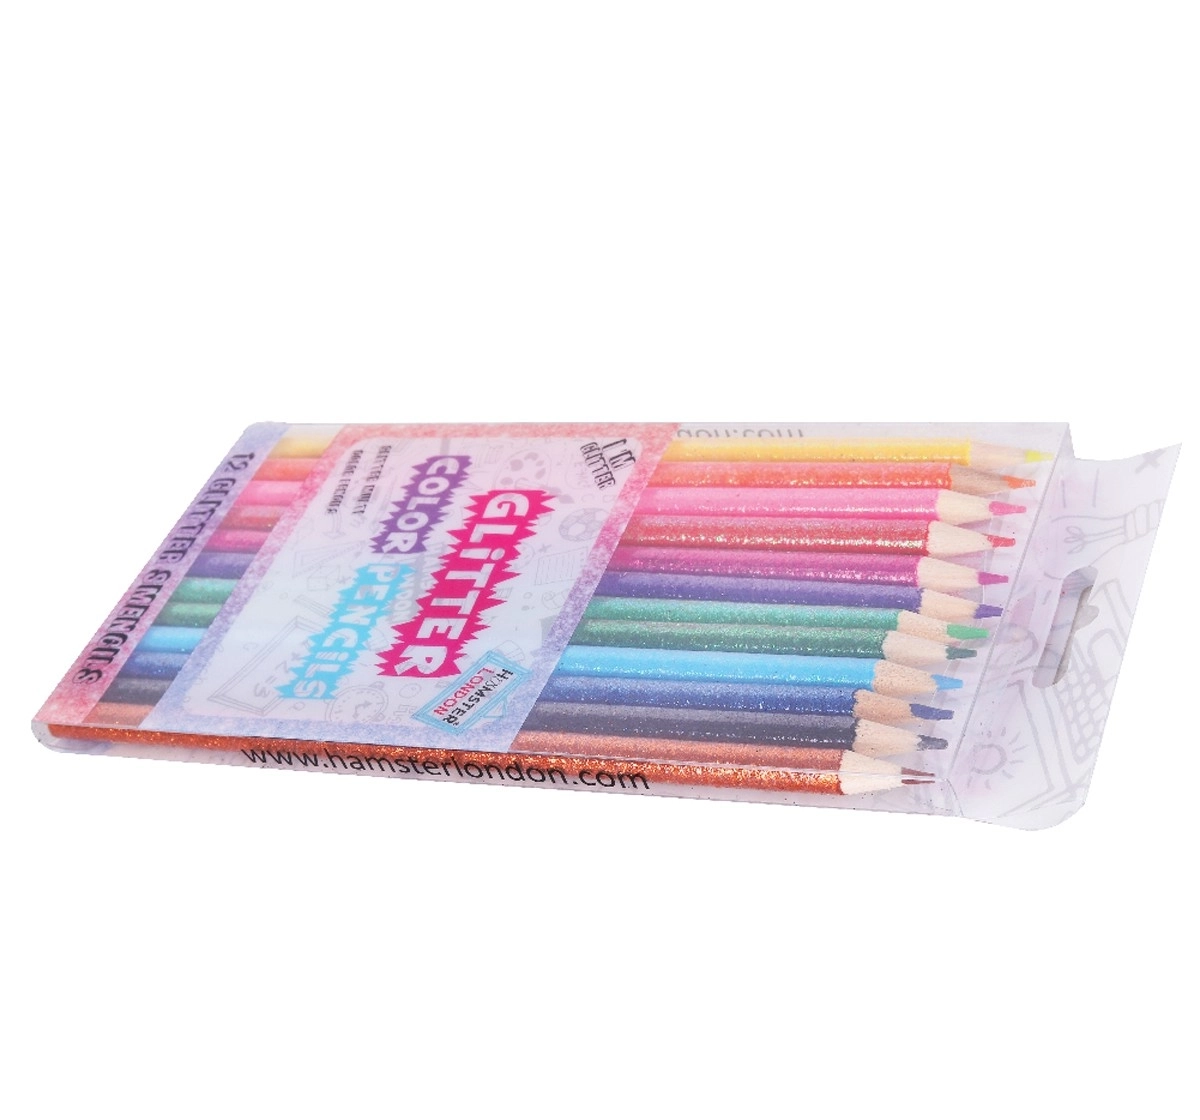 Scented Glitter Pencil Set by Hamster London, Pack of 10, Best Gift for Kids, 3Y+